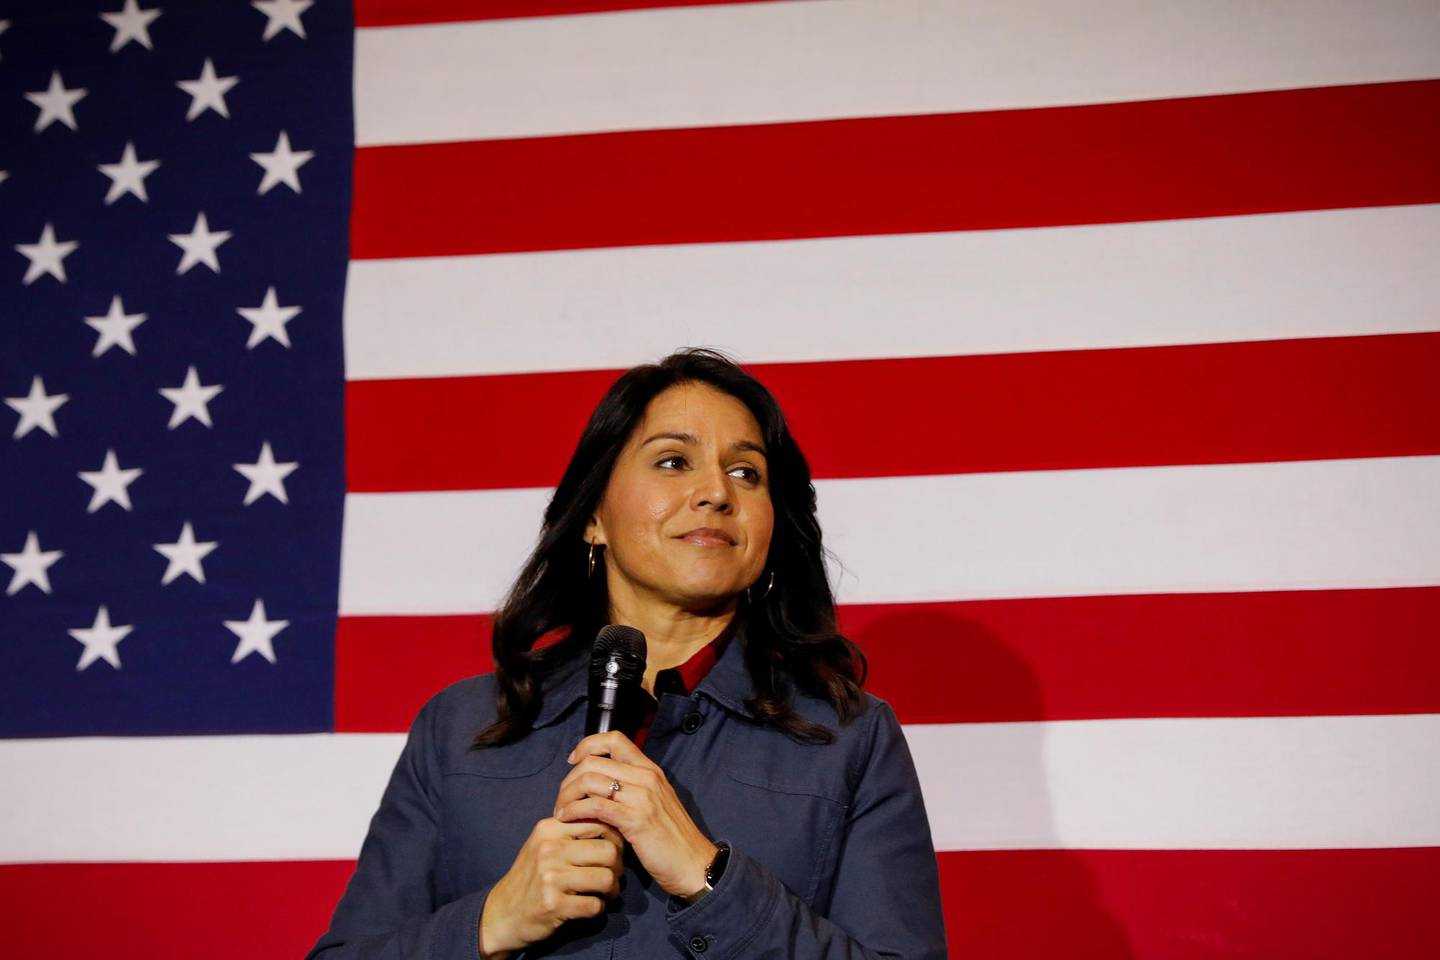 Democratic presidential candidate Rep. Tulsi Gabbard speaks during a campaign event in Lebanon, New Hampshire, U.S., February 6, 2020.  REUTERS/Brendan McDermid